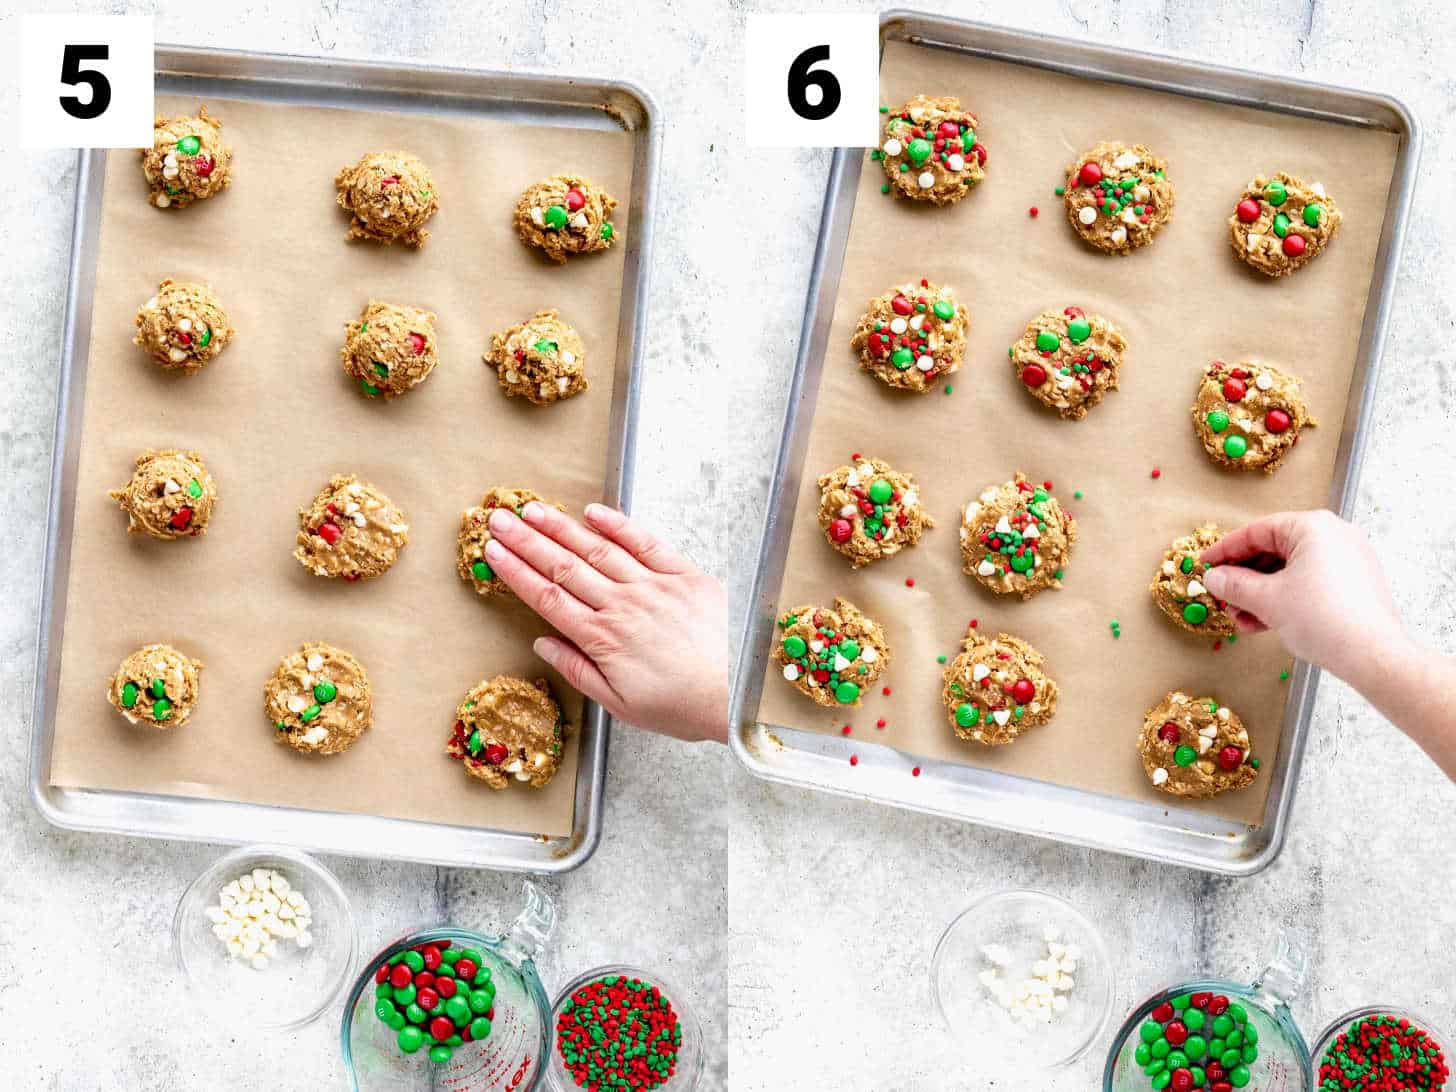 pressing the cookies down and decorating before baking